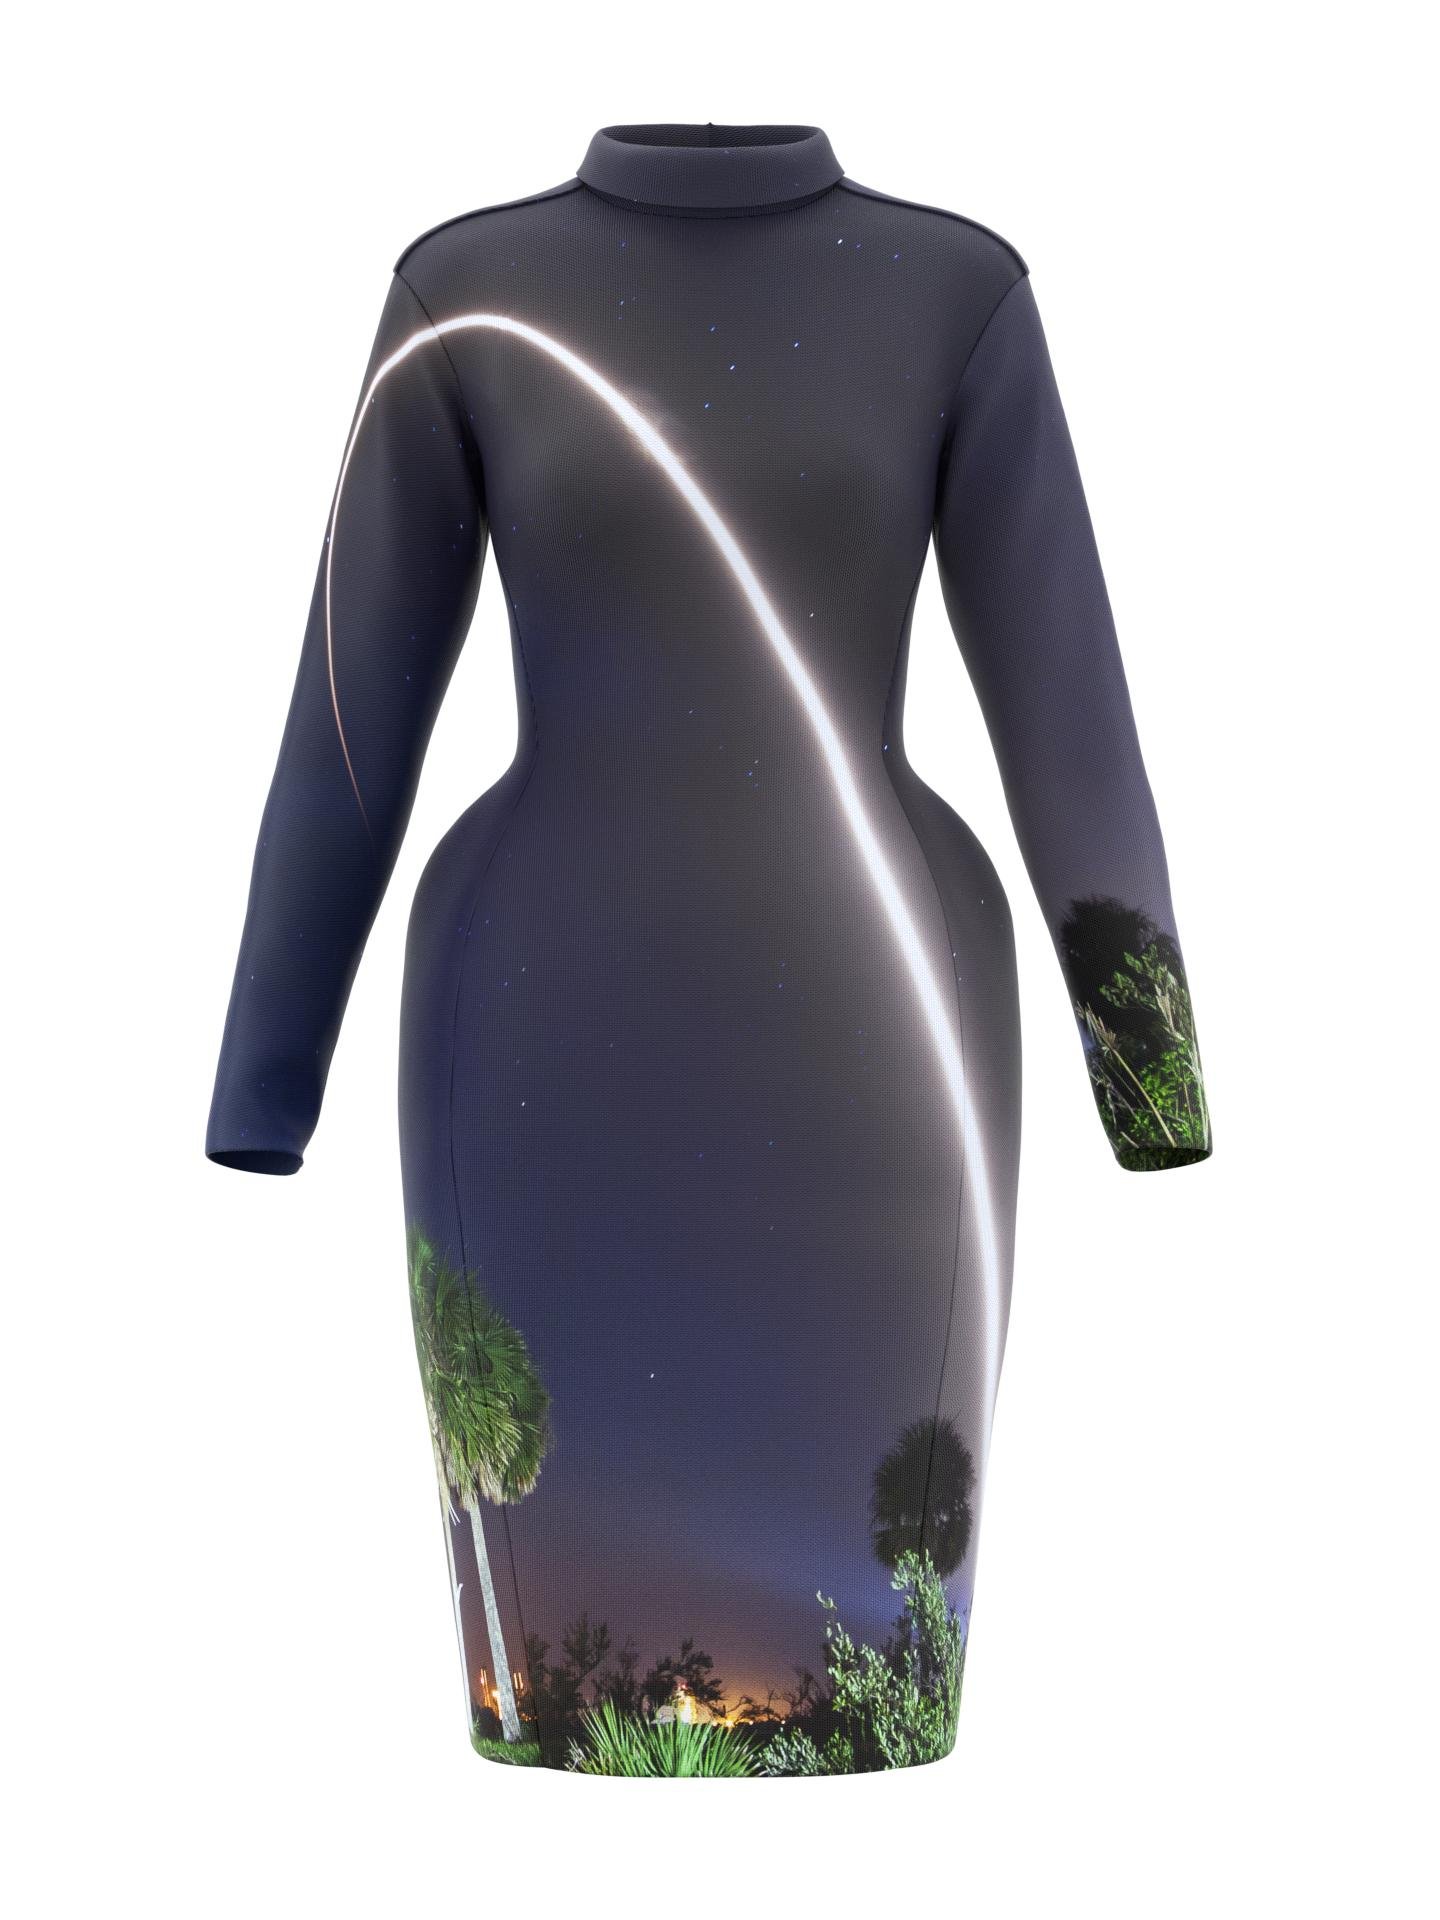 Space Dress - Men occupy very little space on Earth by DRESSX